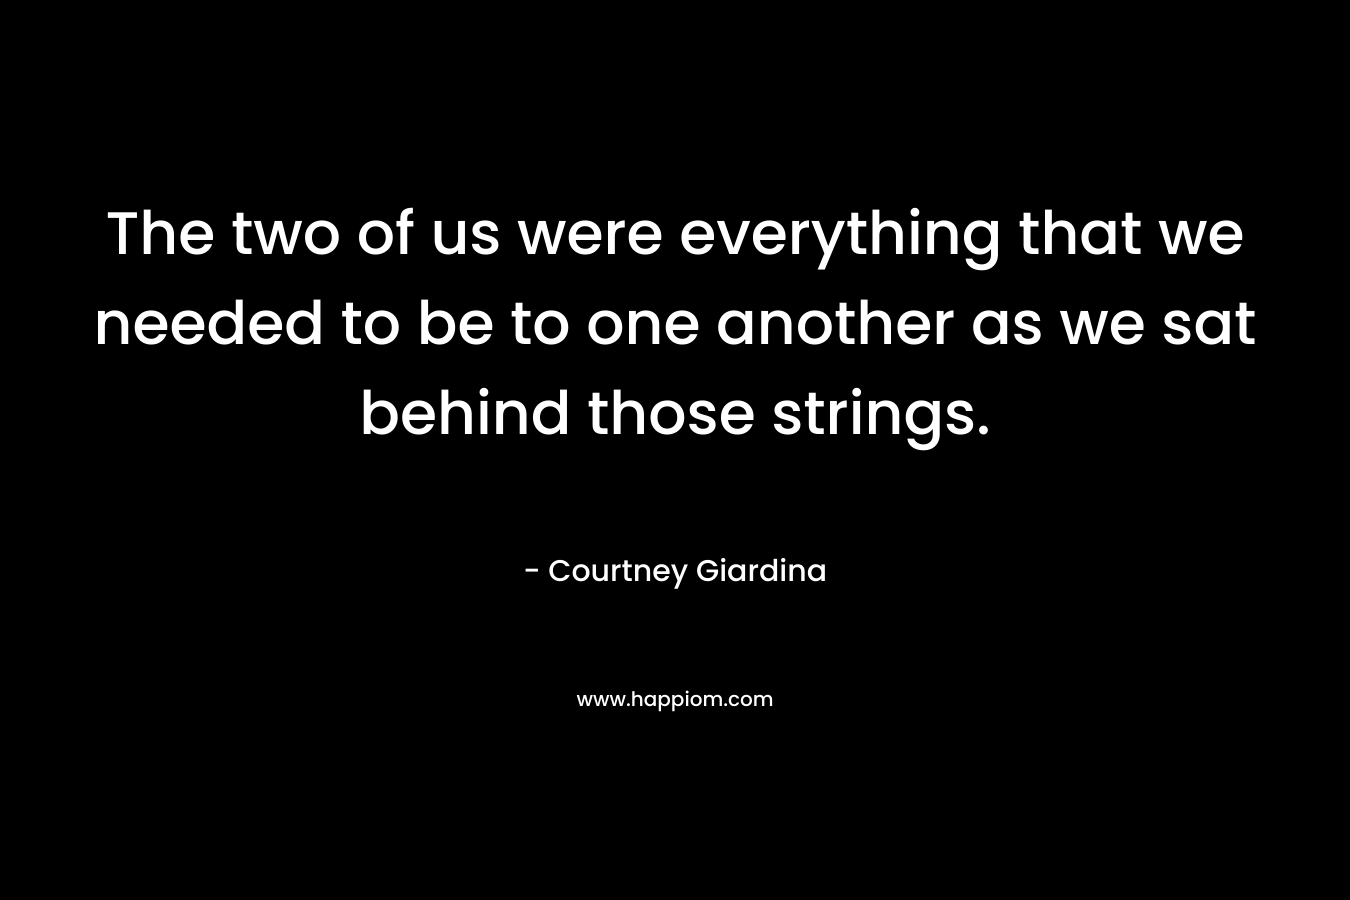 The two of us were everything that we needed to be to one another as we sat behind those strings. – Courtney Giardina